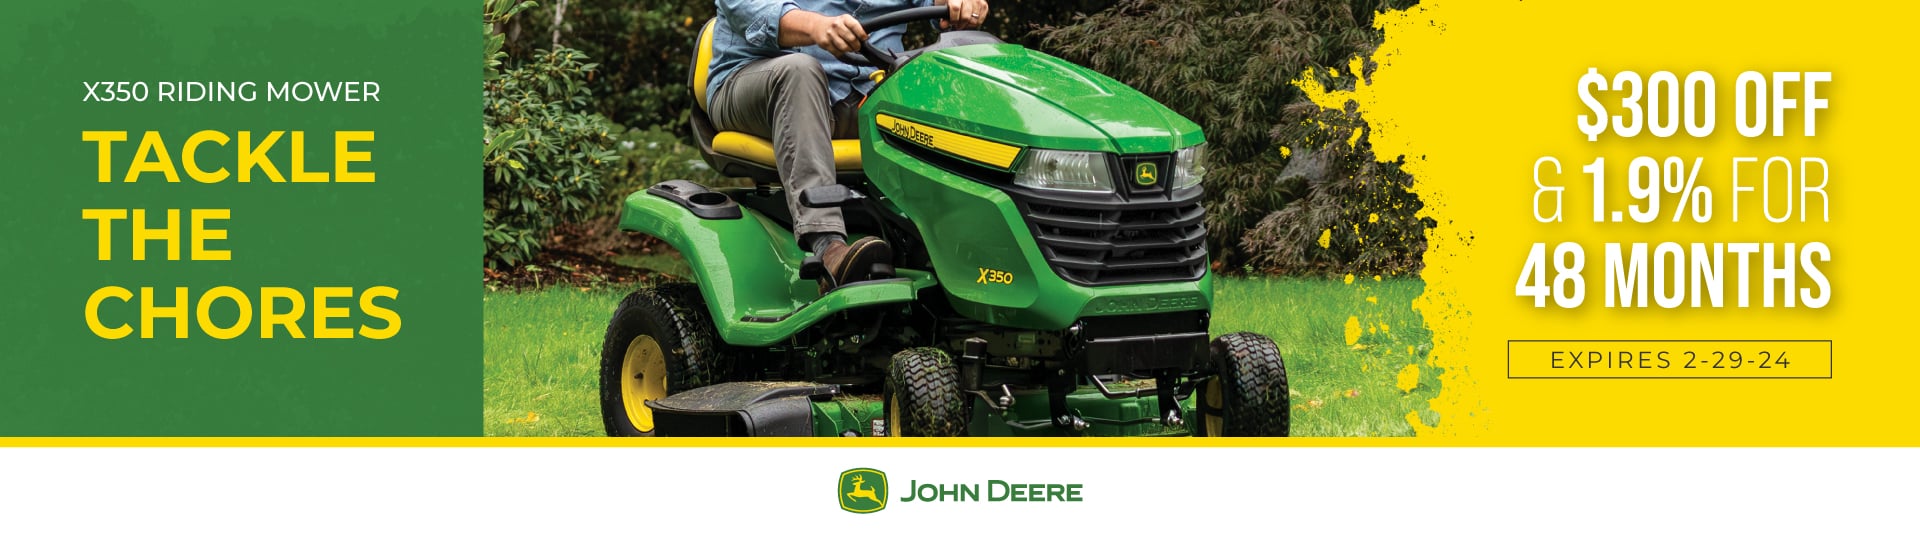 John Deere X350 - $300 Off and 1.9% for 48 Months